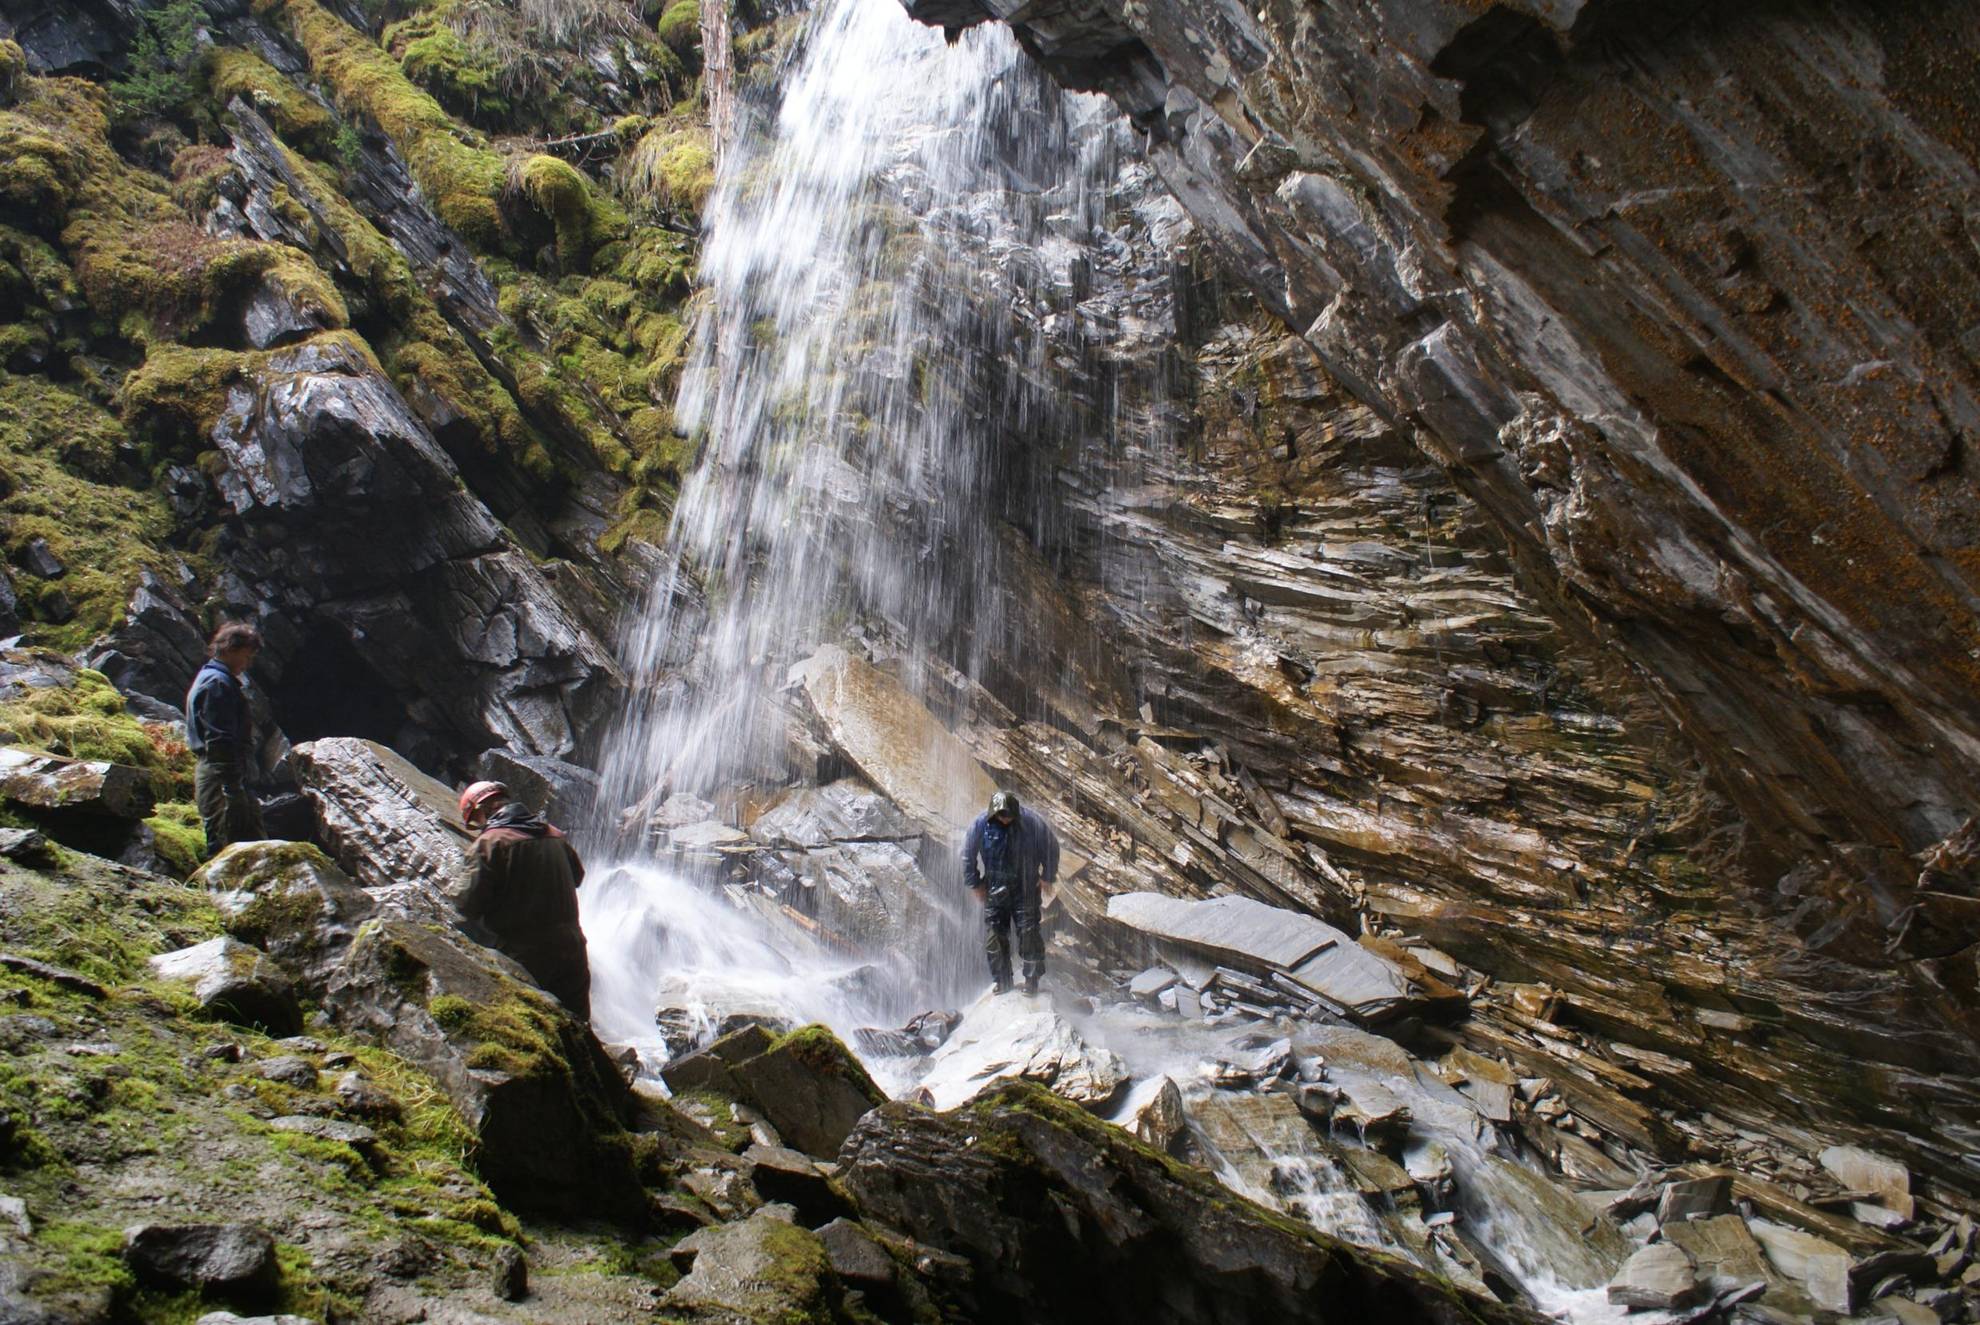 Three people standing in a glade with a waterfall. One of the people is standing in the waterfall.